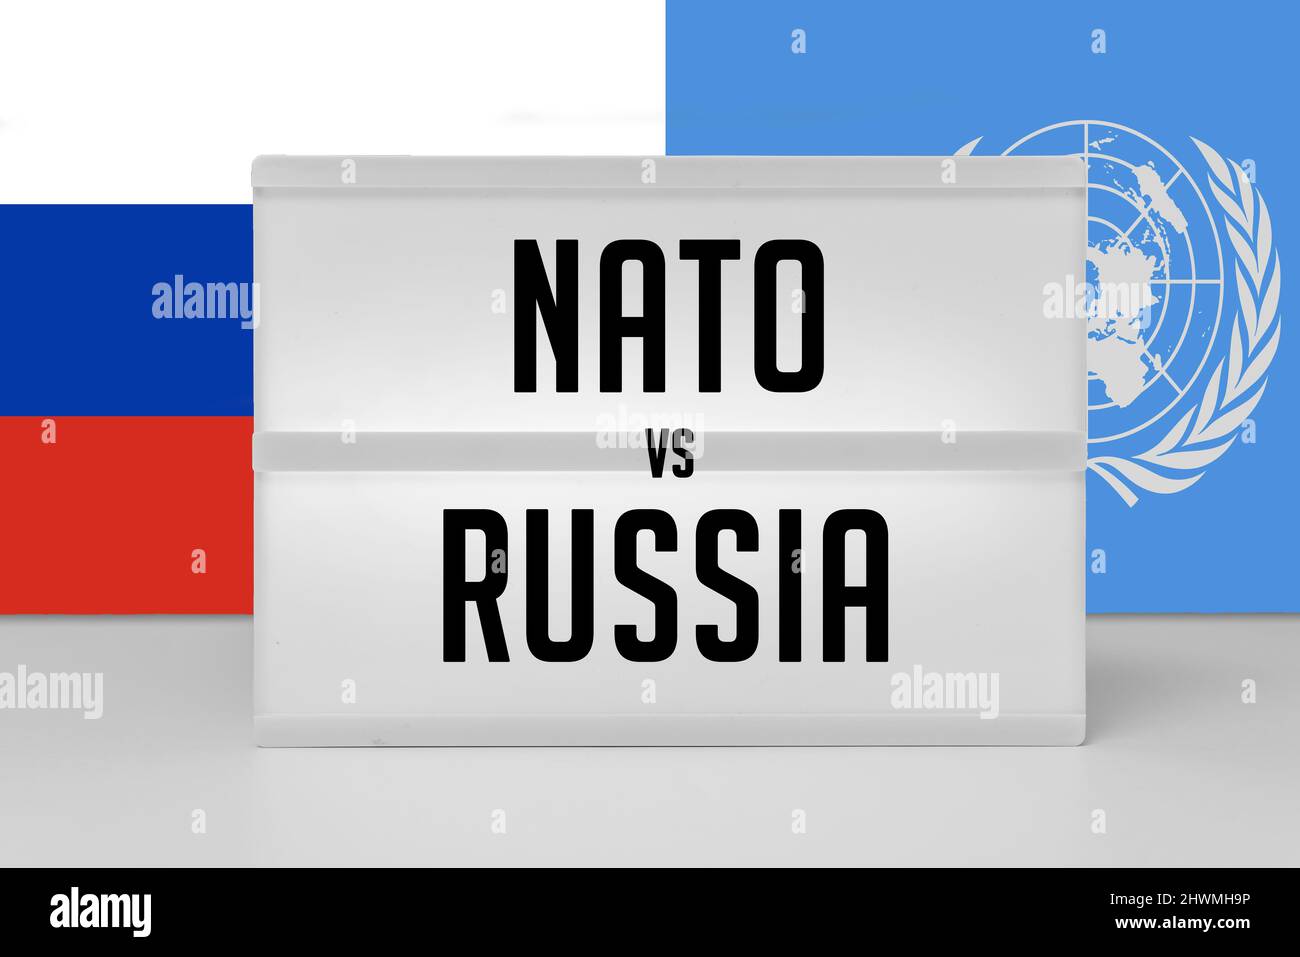 Nato vs Russia text with flags in the background Stock Photo